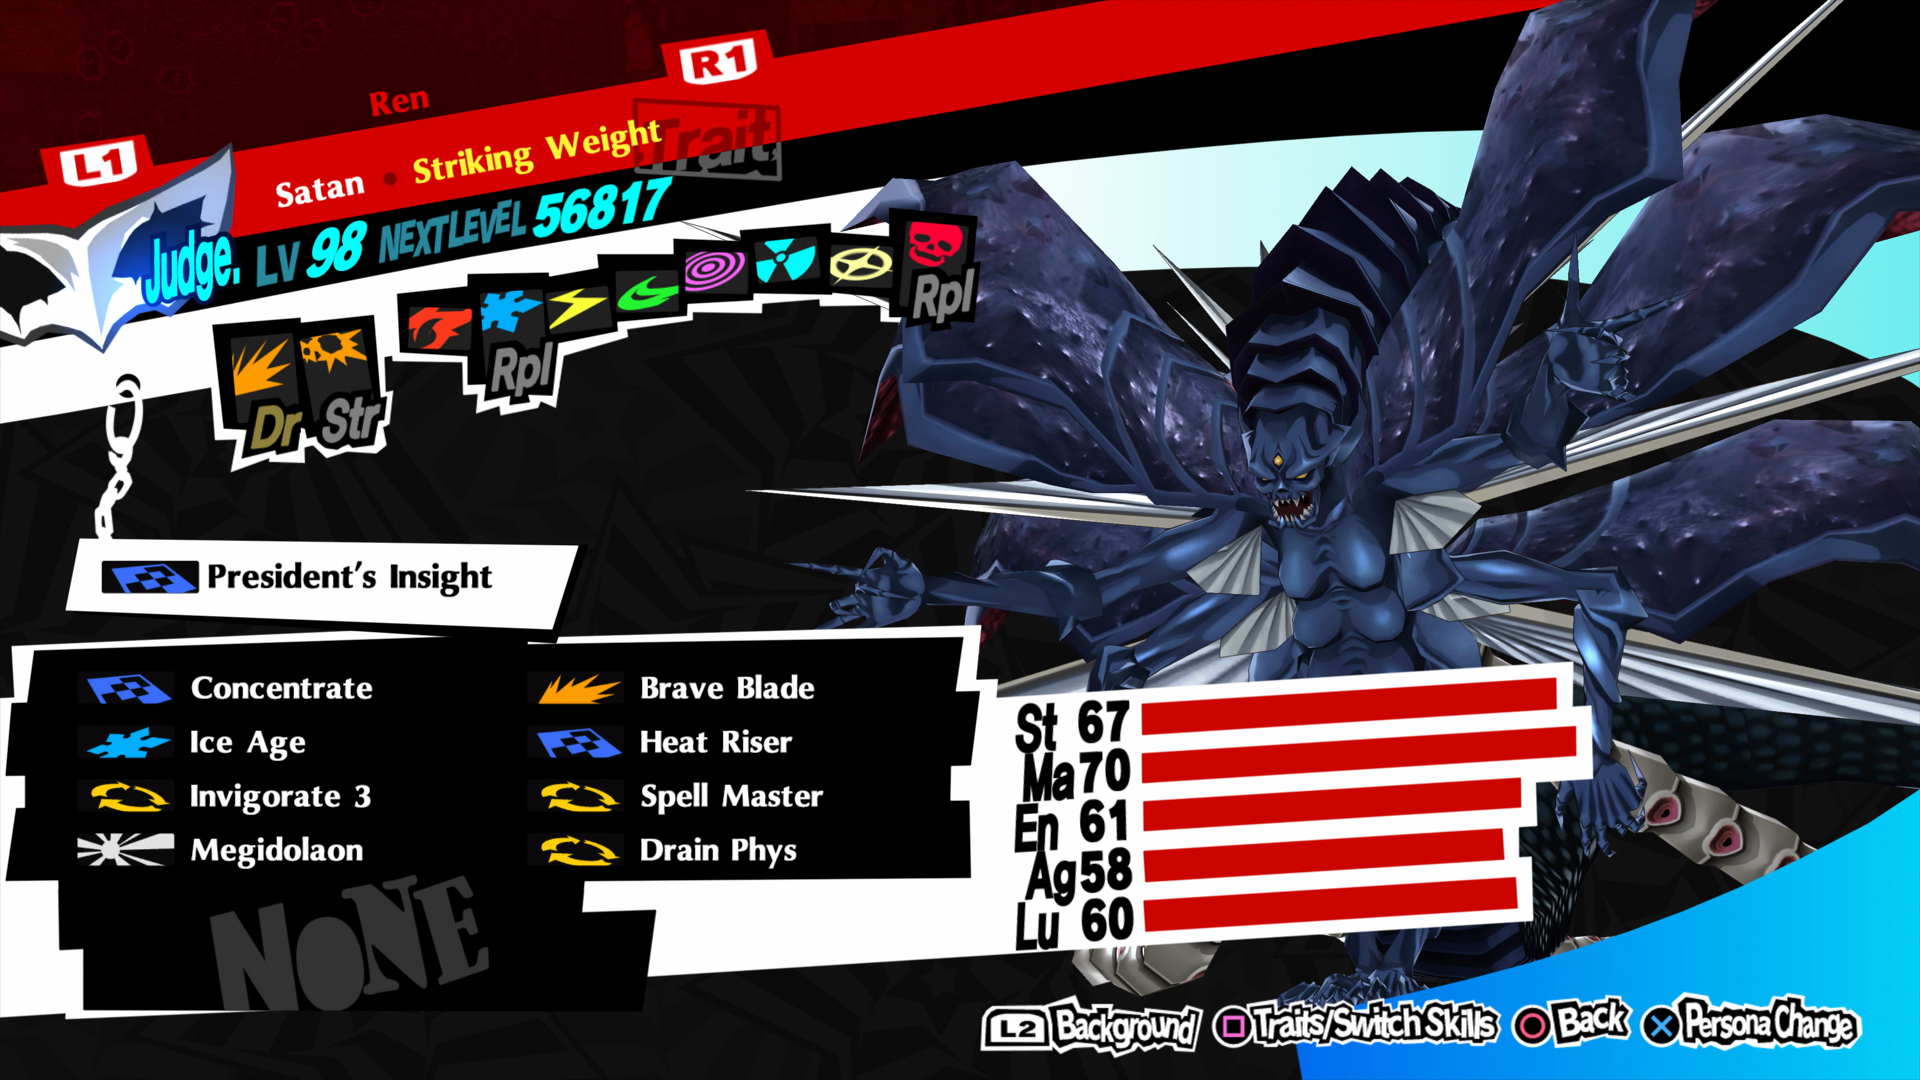 Persona 5 Royal re-release takes the perfect Japanese RPG to another level